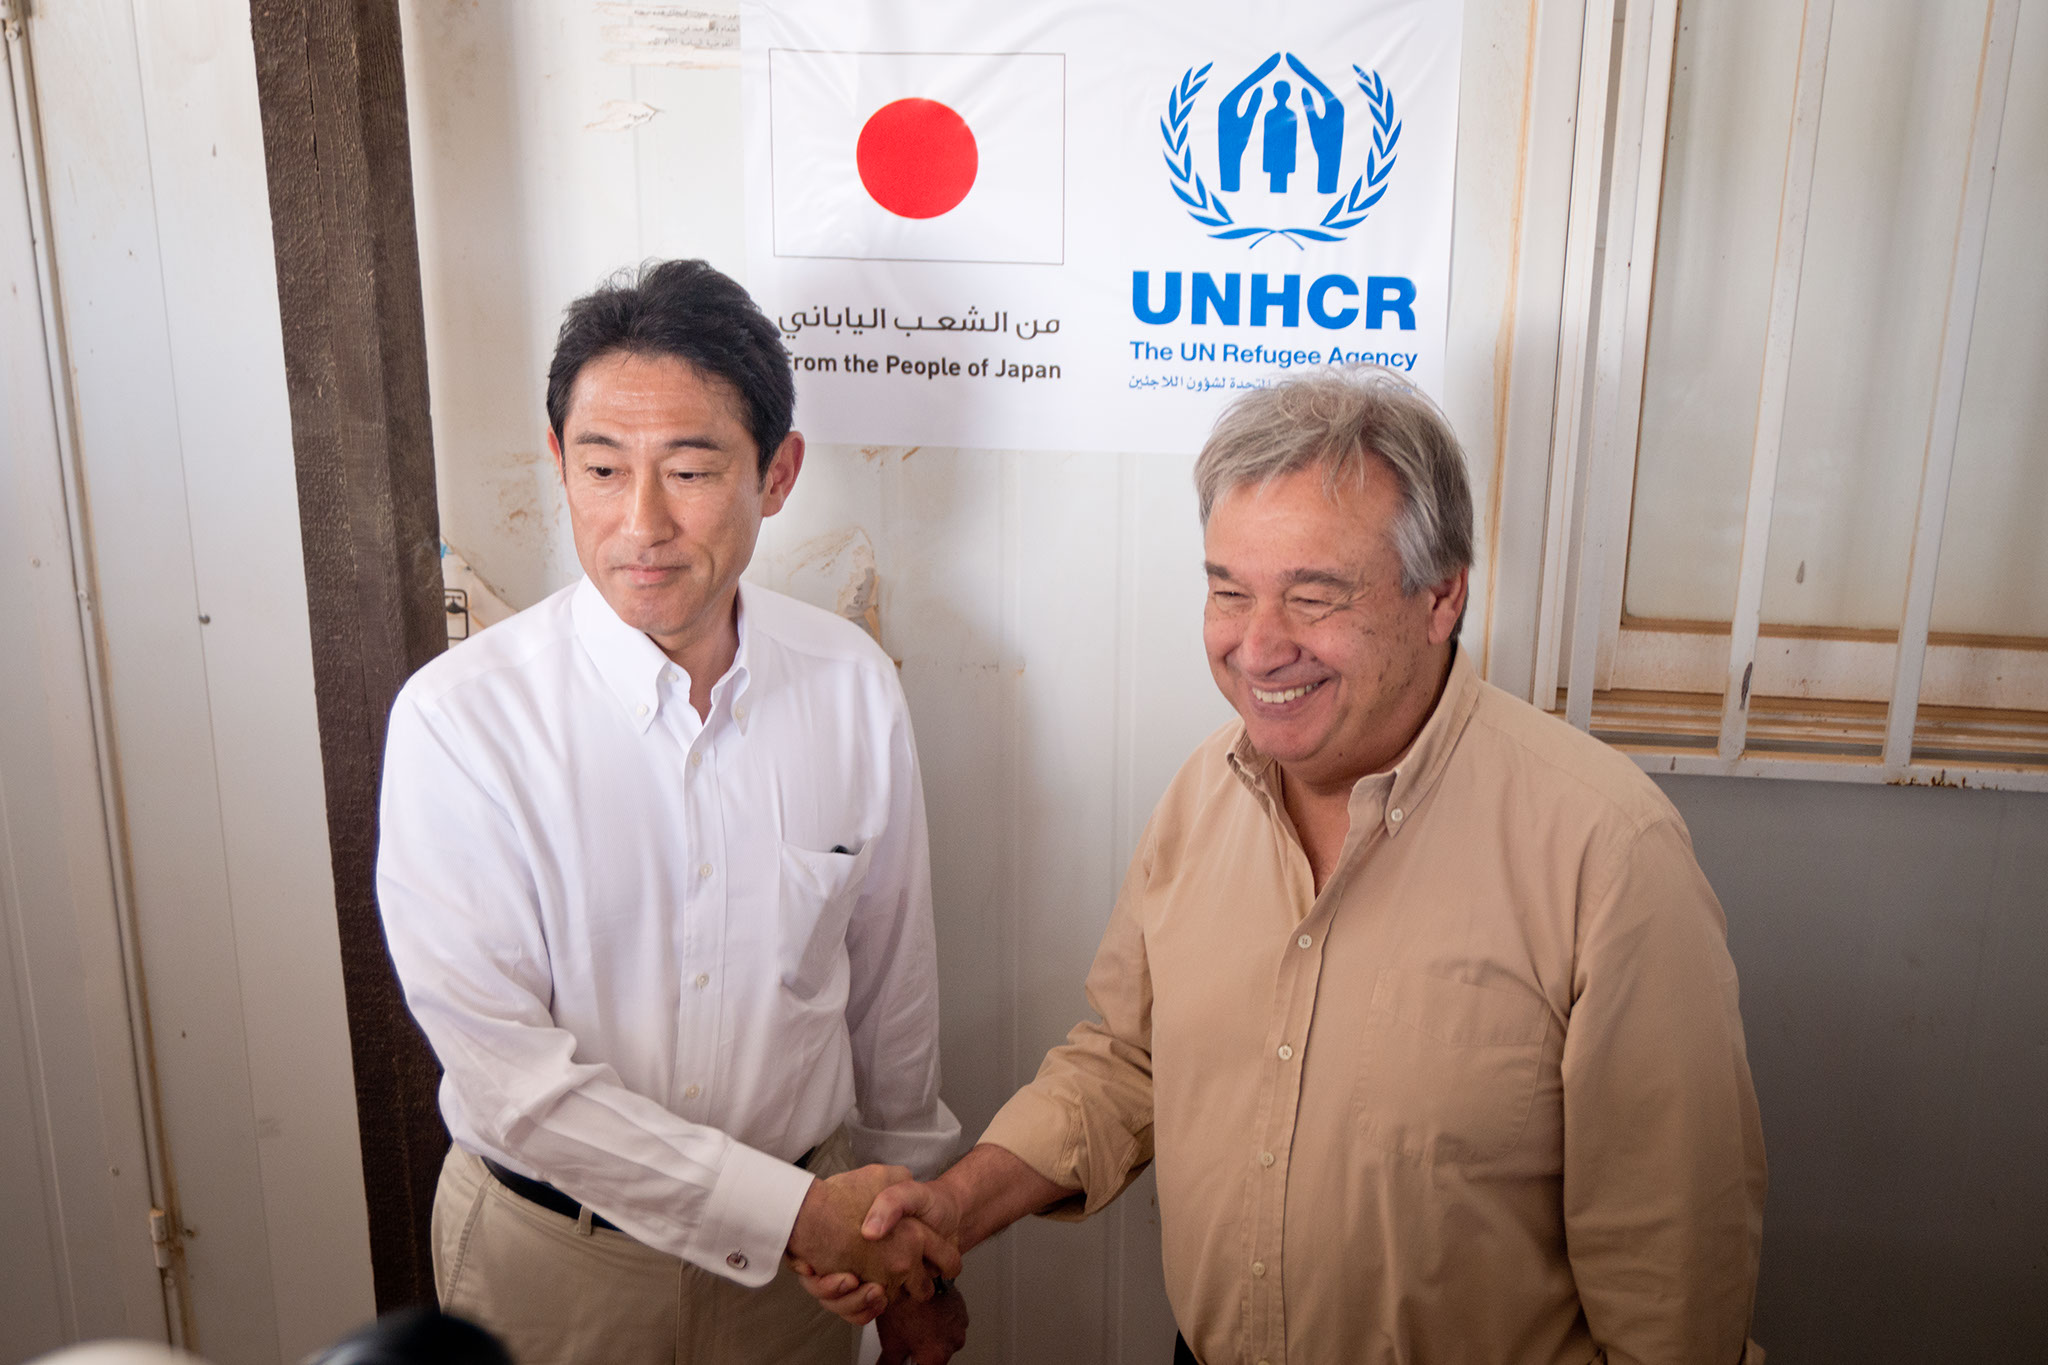 Minister for Foreign Affairs, Japan, Fumio Kishida meeting with the United Nations High Commissioner for Refugees, António Guterres, in Zaatari Refugee Camp. Photo: UNHCR/J Kohler